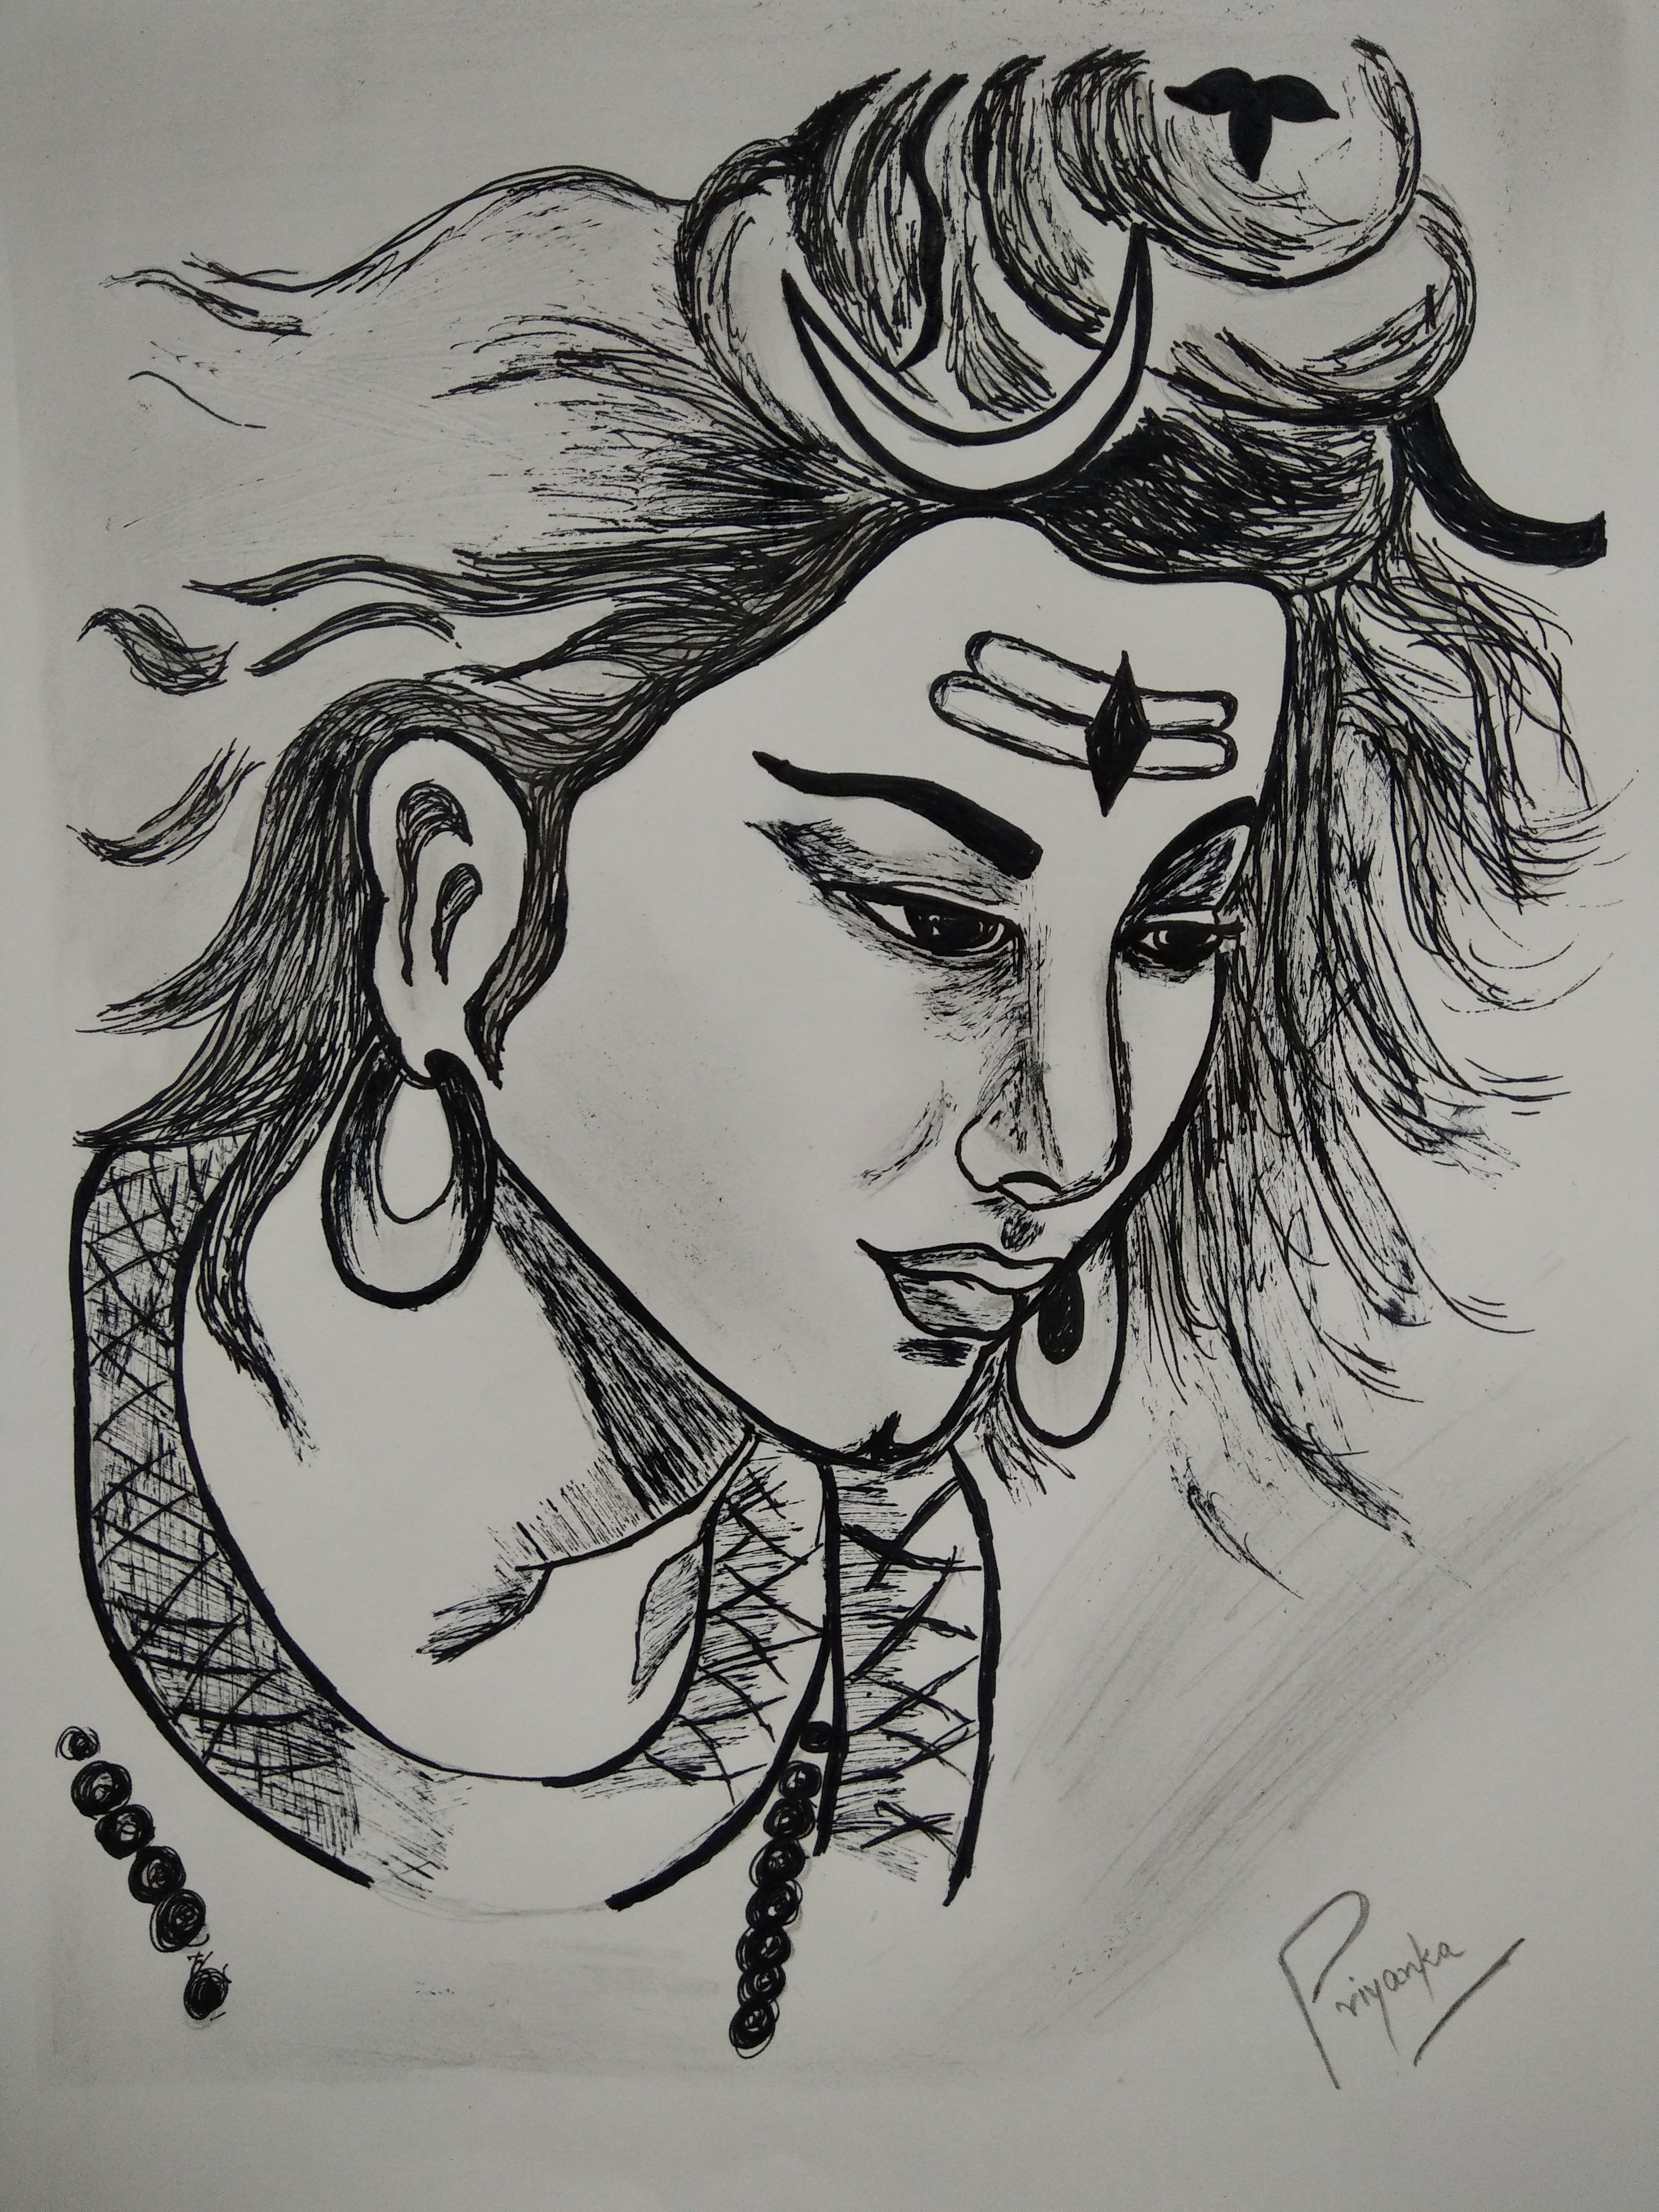 Lord Shiva paper drawing by lucytoastinne484 on DeviantArt-saigonsouth.com.vn